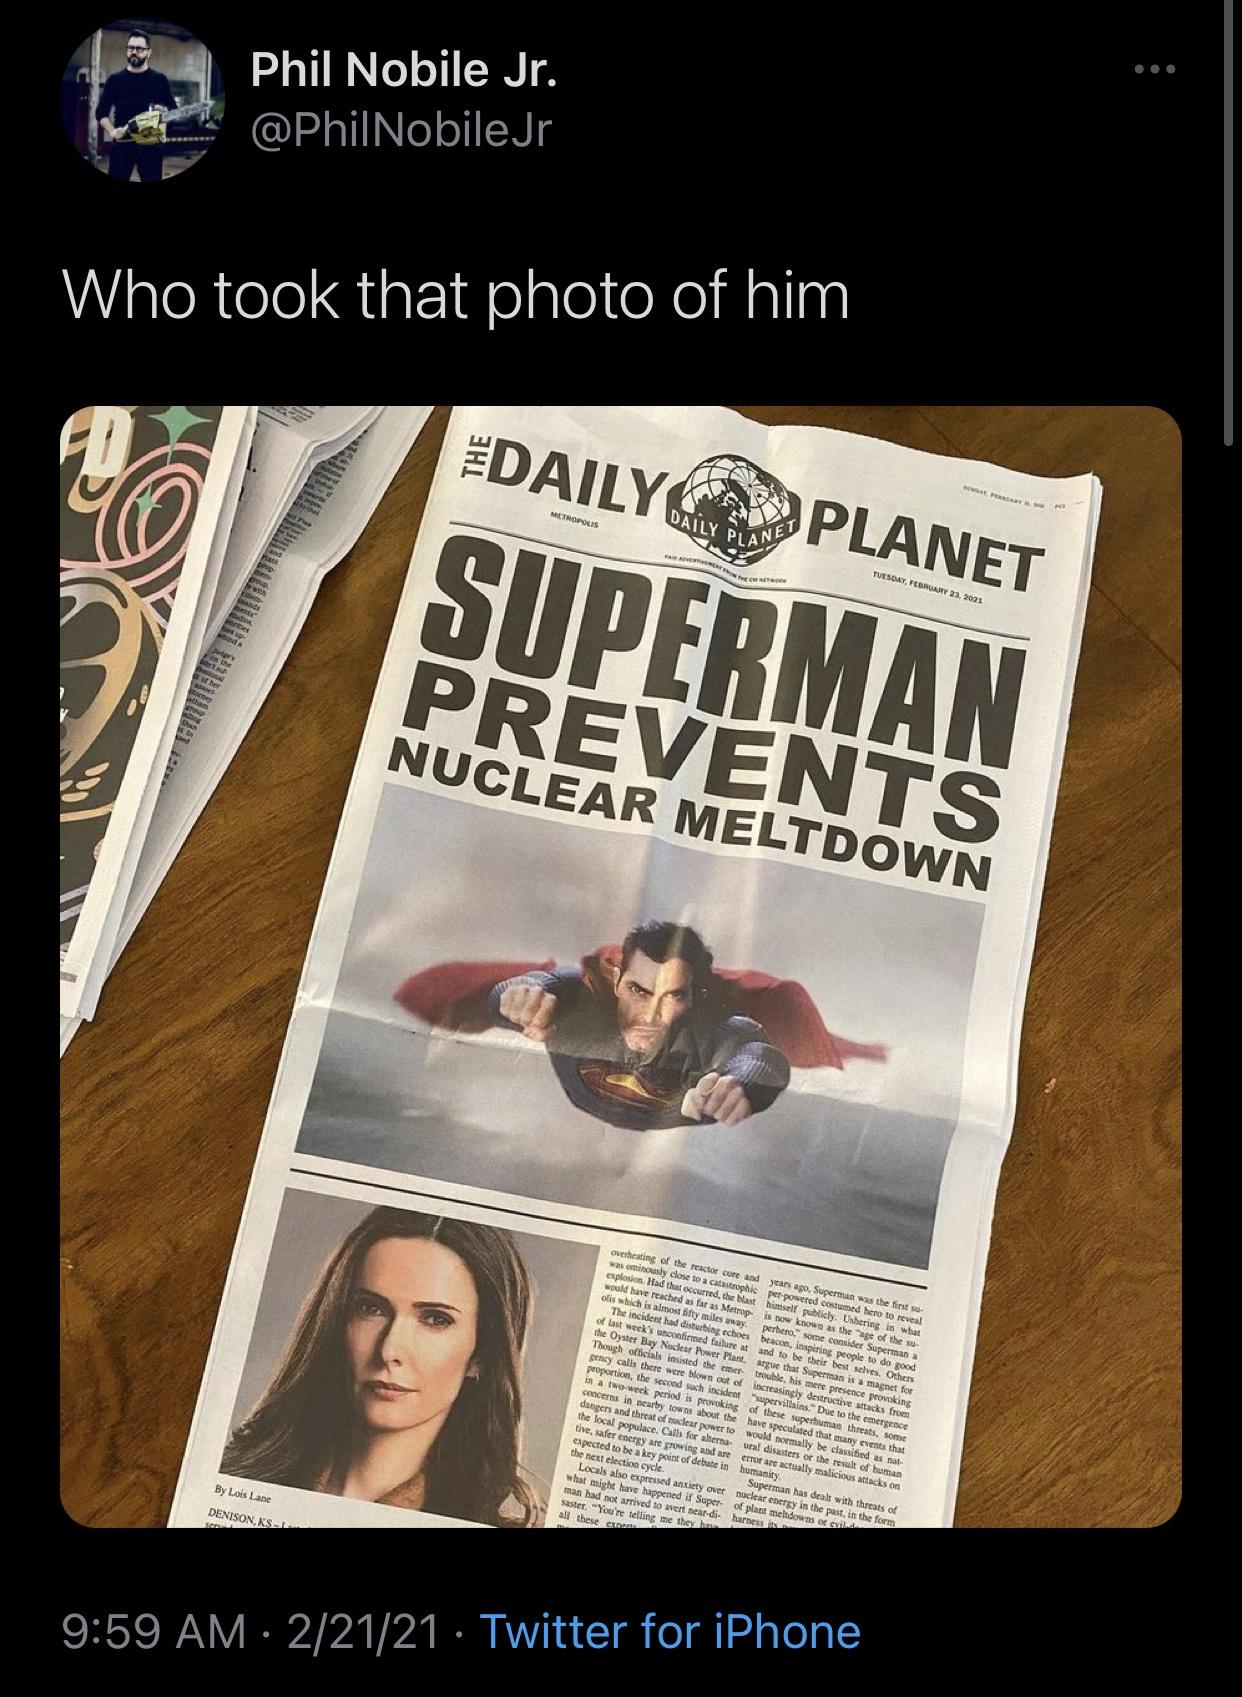 poster - Phil Nobile Jr. Nobiler Who took that photo of him Daily Web Metropolis Daily Planet Plane Tuesday, Superman Prevents Nuclear Meltdown Overheating of the reactor core and years ago, Superman was the first su was mously close to a catastrophic per